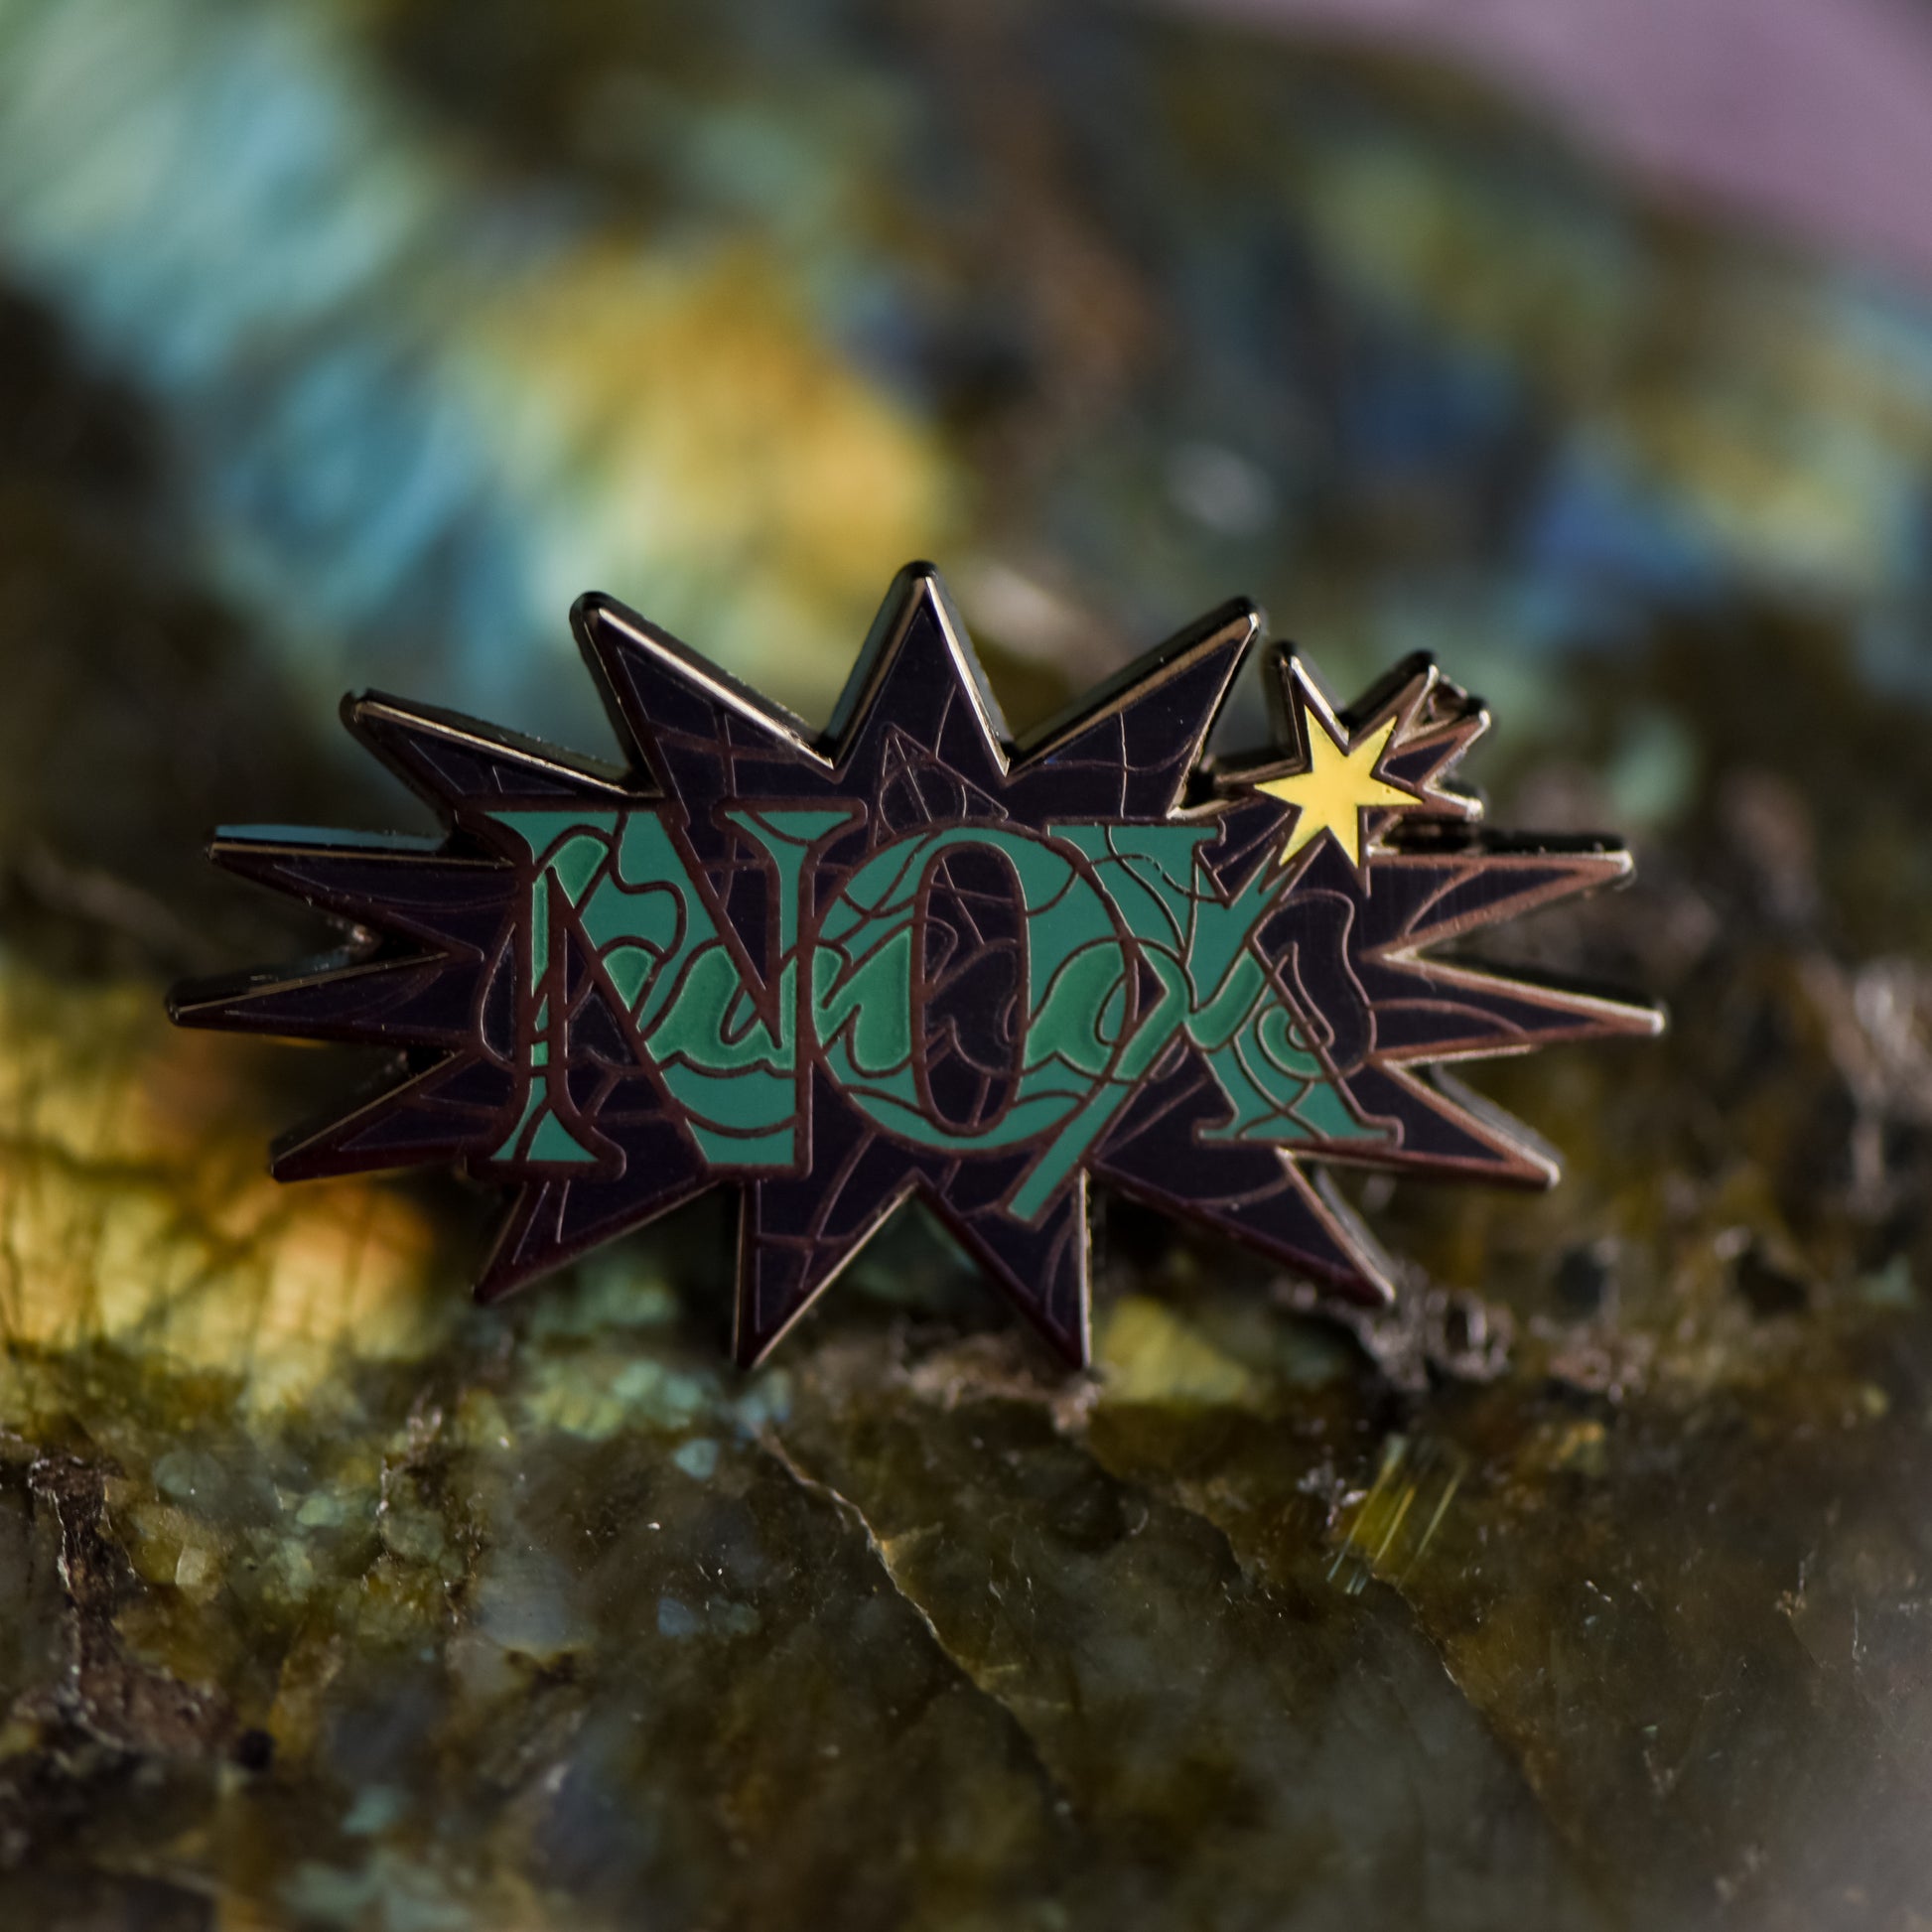 Black nickel enamel pin with Nox in green letters on a potion spell book